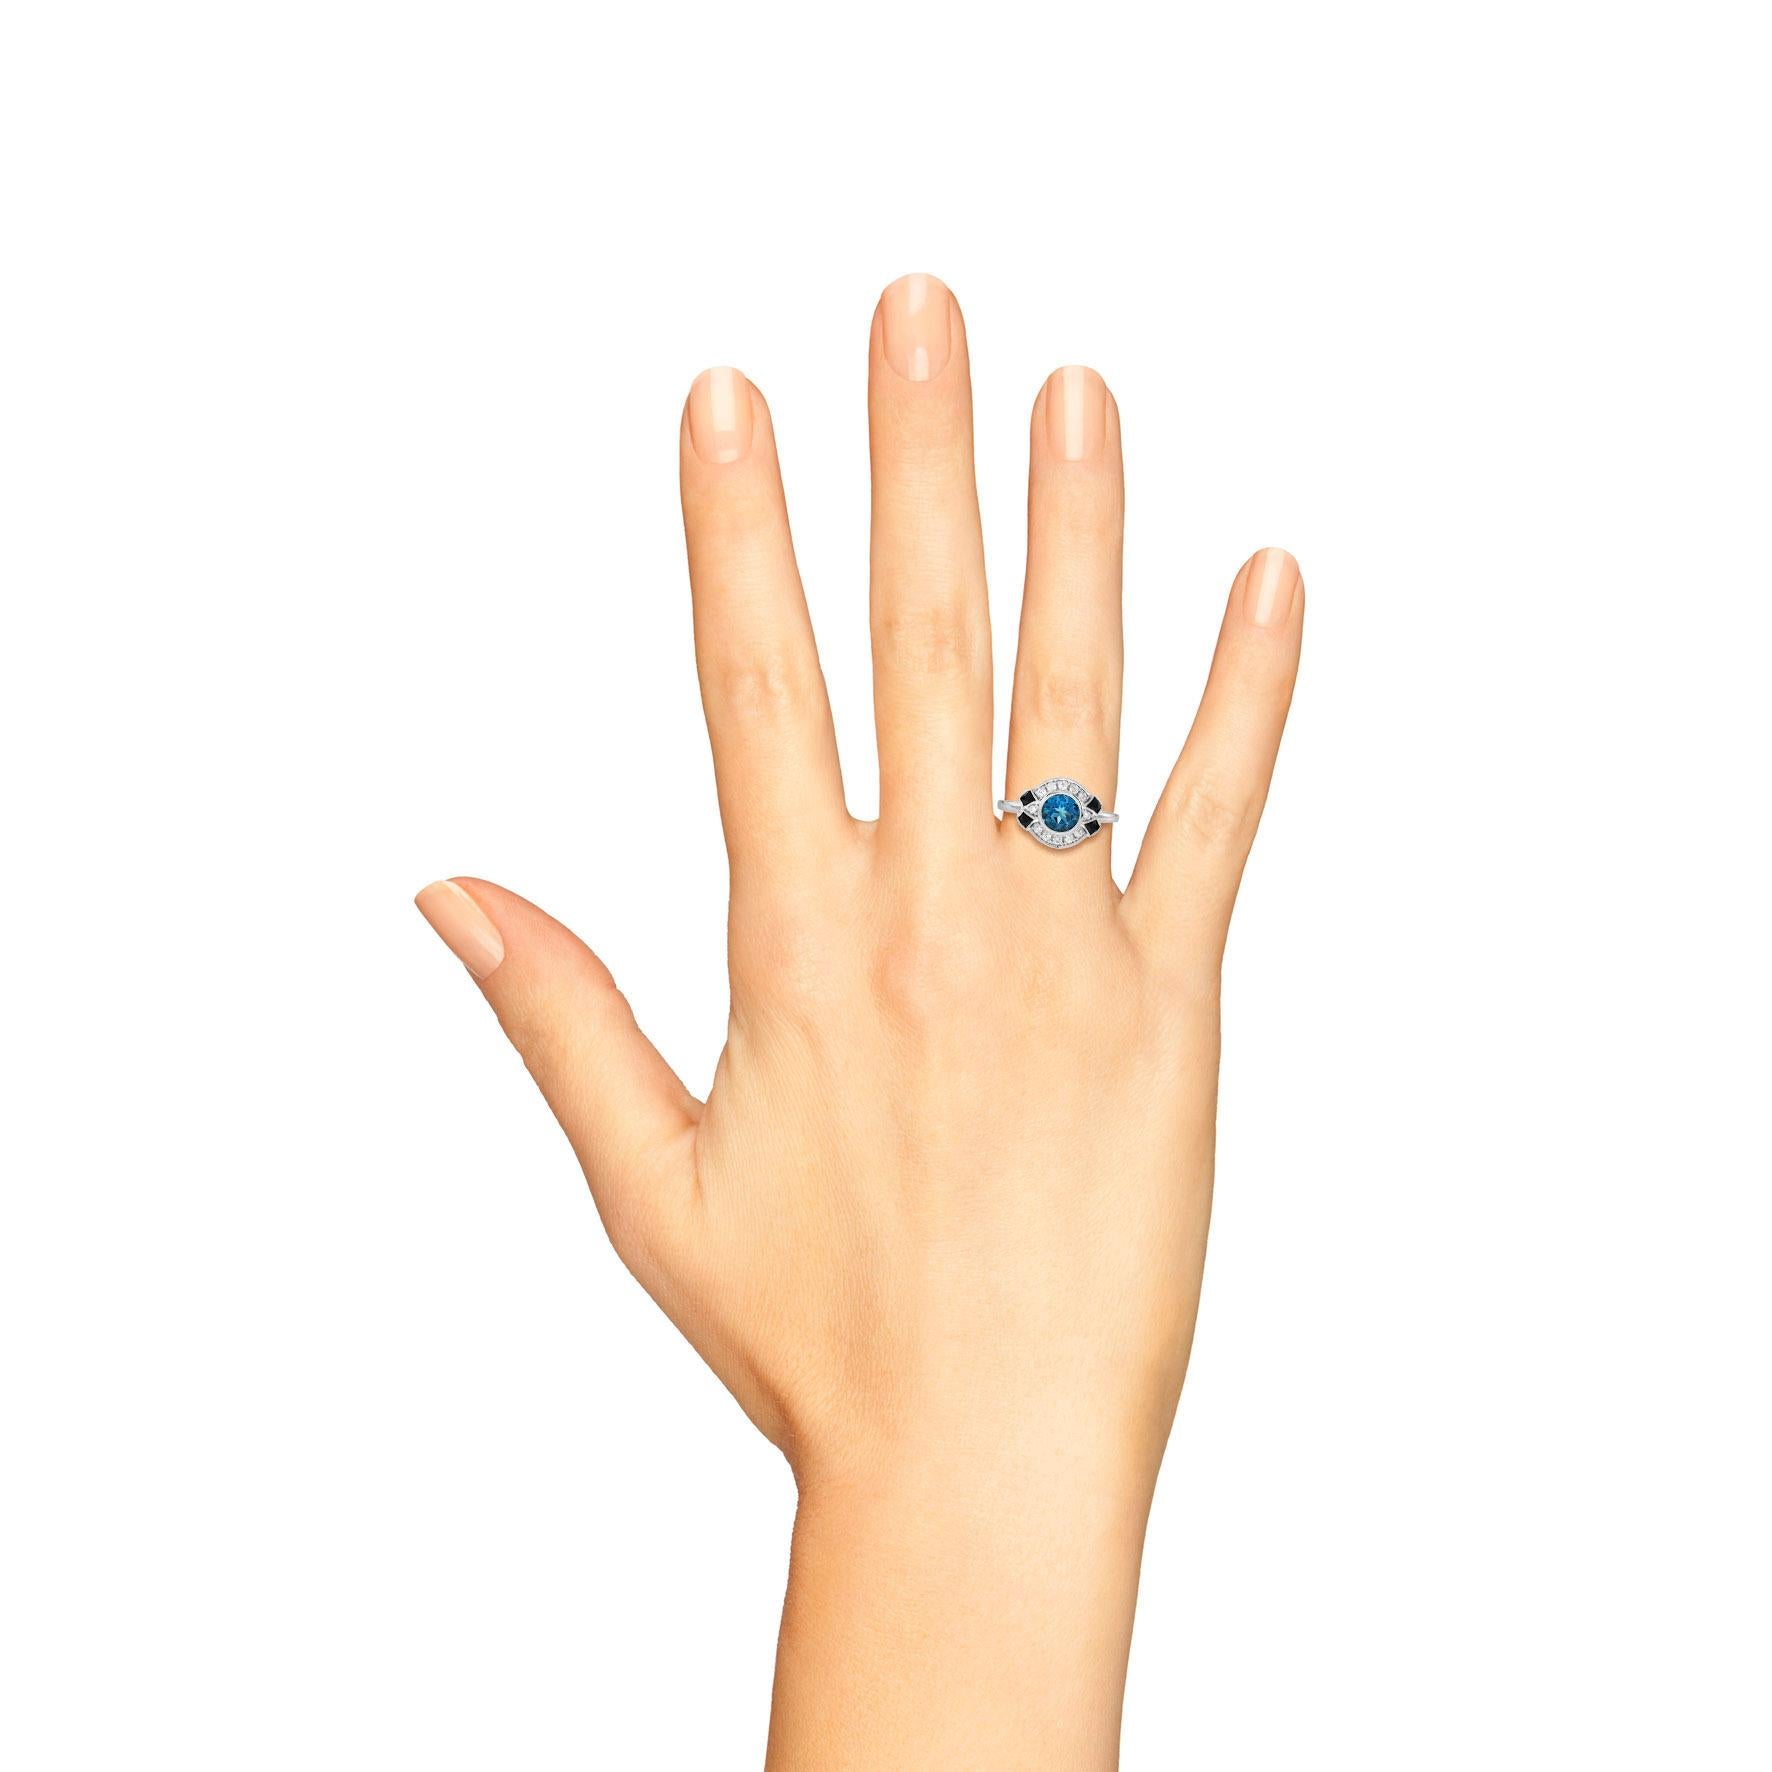 Crafted in 14k white gold, this fanciful contemporary, Art Deco inspired ring sees a raised an opulent 2.20 carat oval deep blue shade of London blue topaz surrounded by sparkling round diamonds and onyxes. This charming piece is a winsome adornment